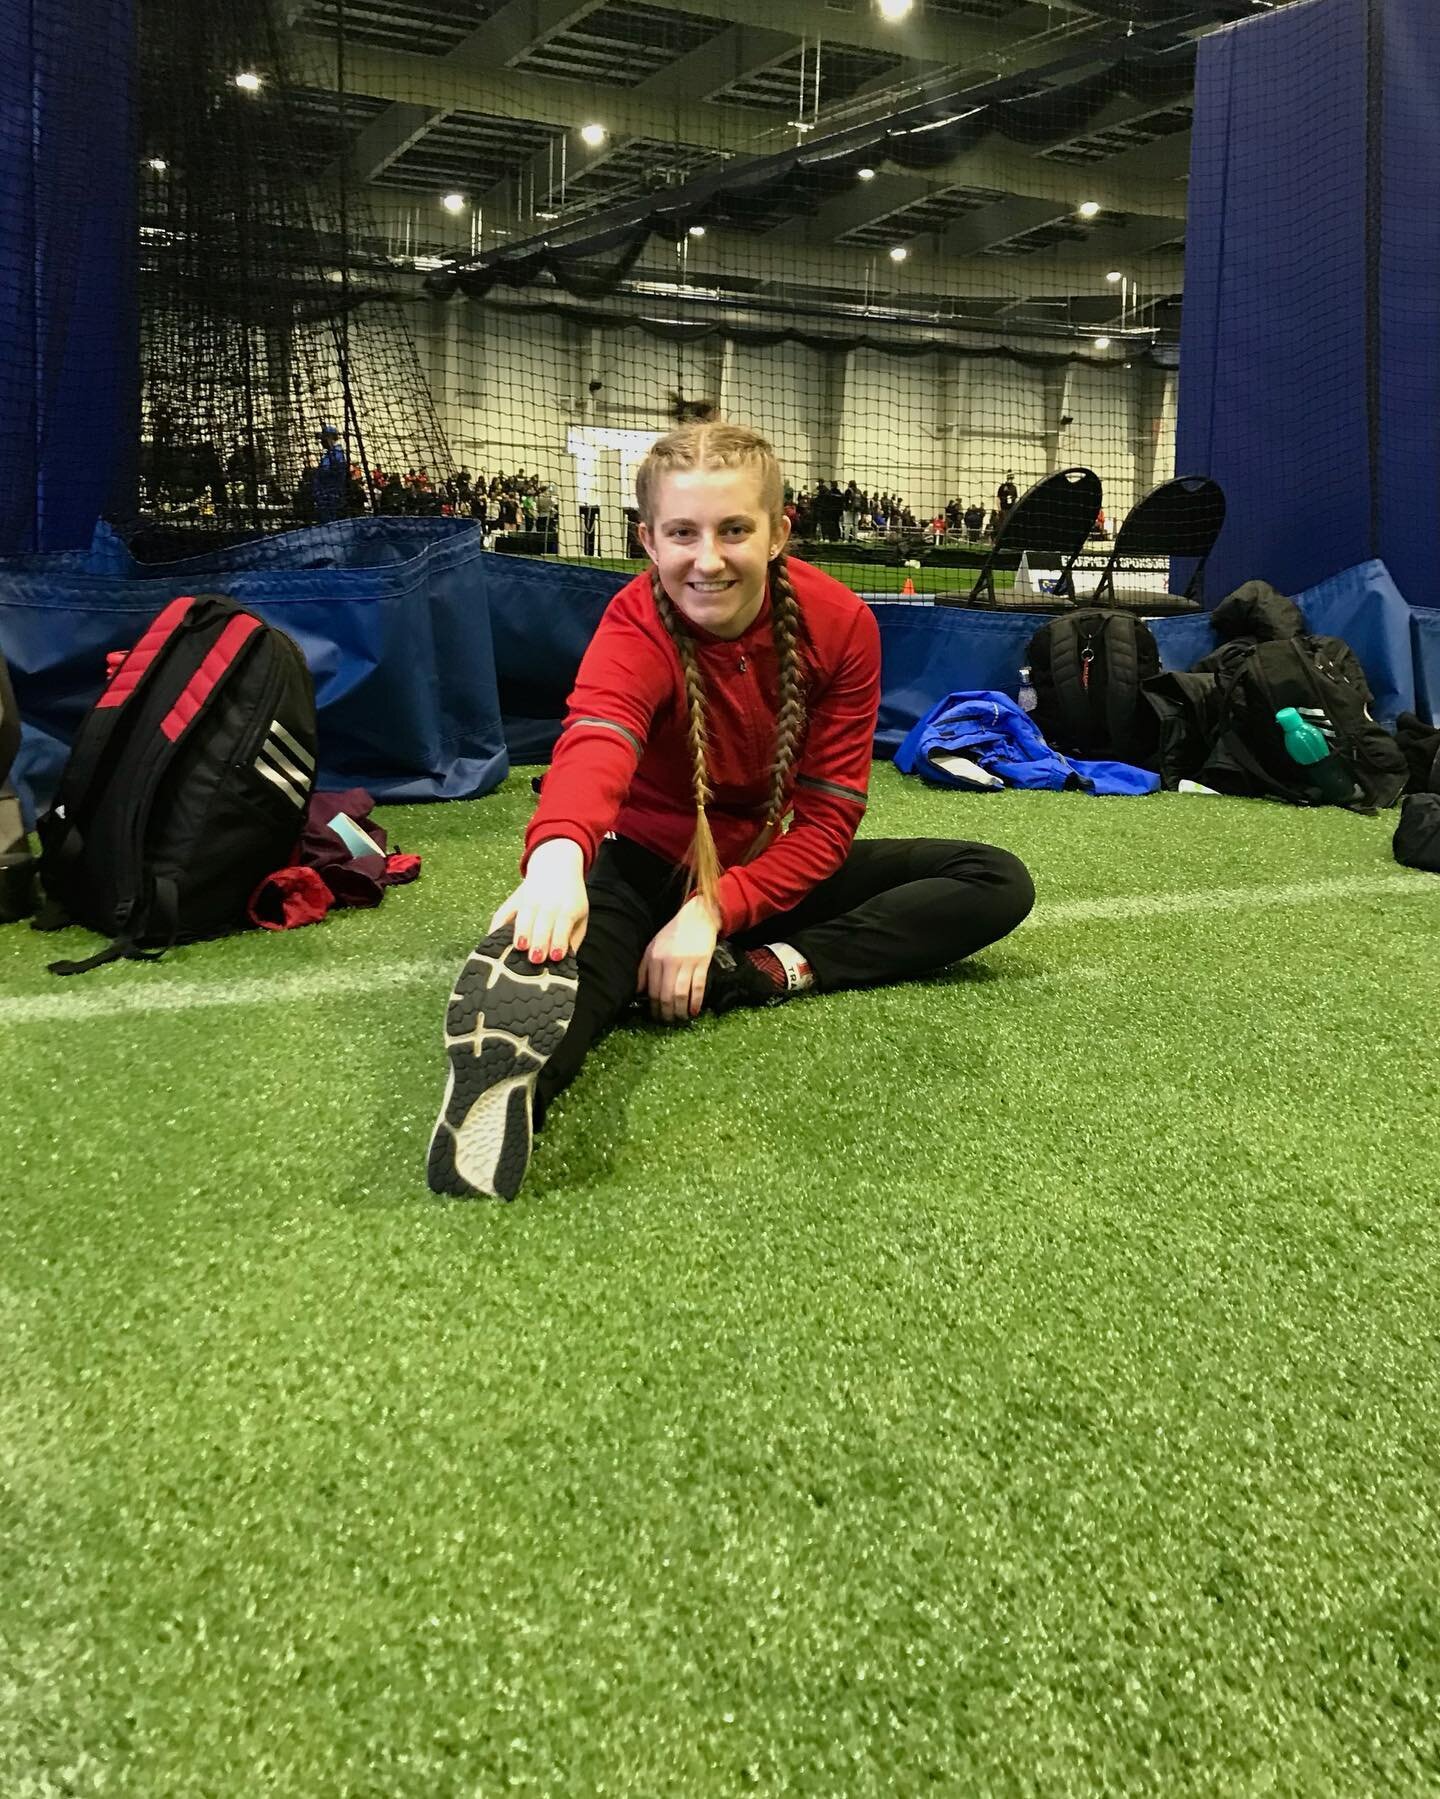 Introducing your McGill USports 2022 qualifiers🔥

Bethany Walton-Knight
Events: 4x200m